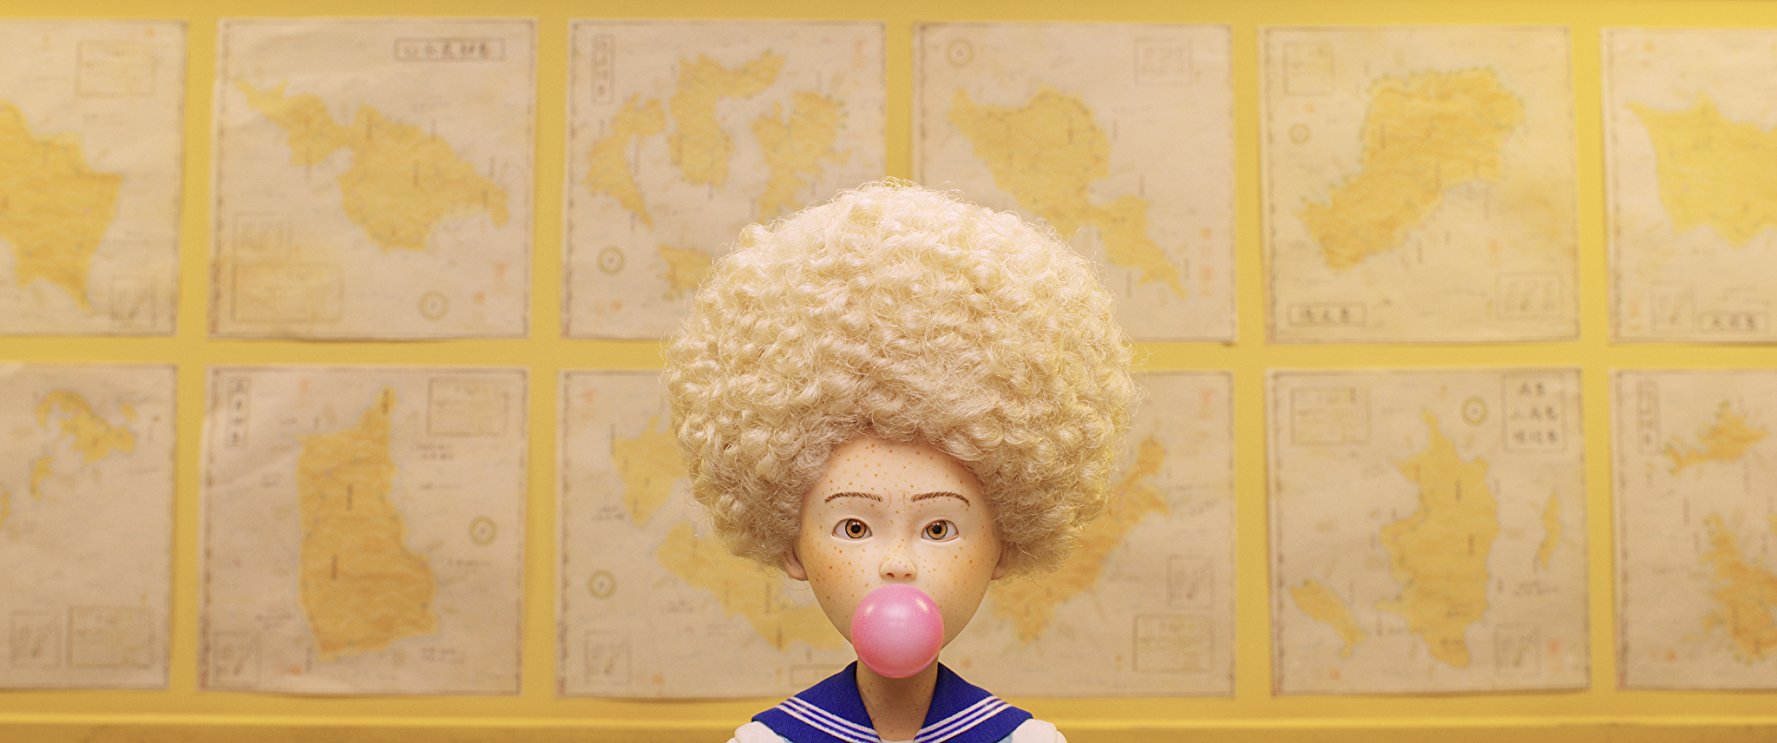 Tracy, voiced by Greta Gerwig, wears an afro and chews pink bubble gum.